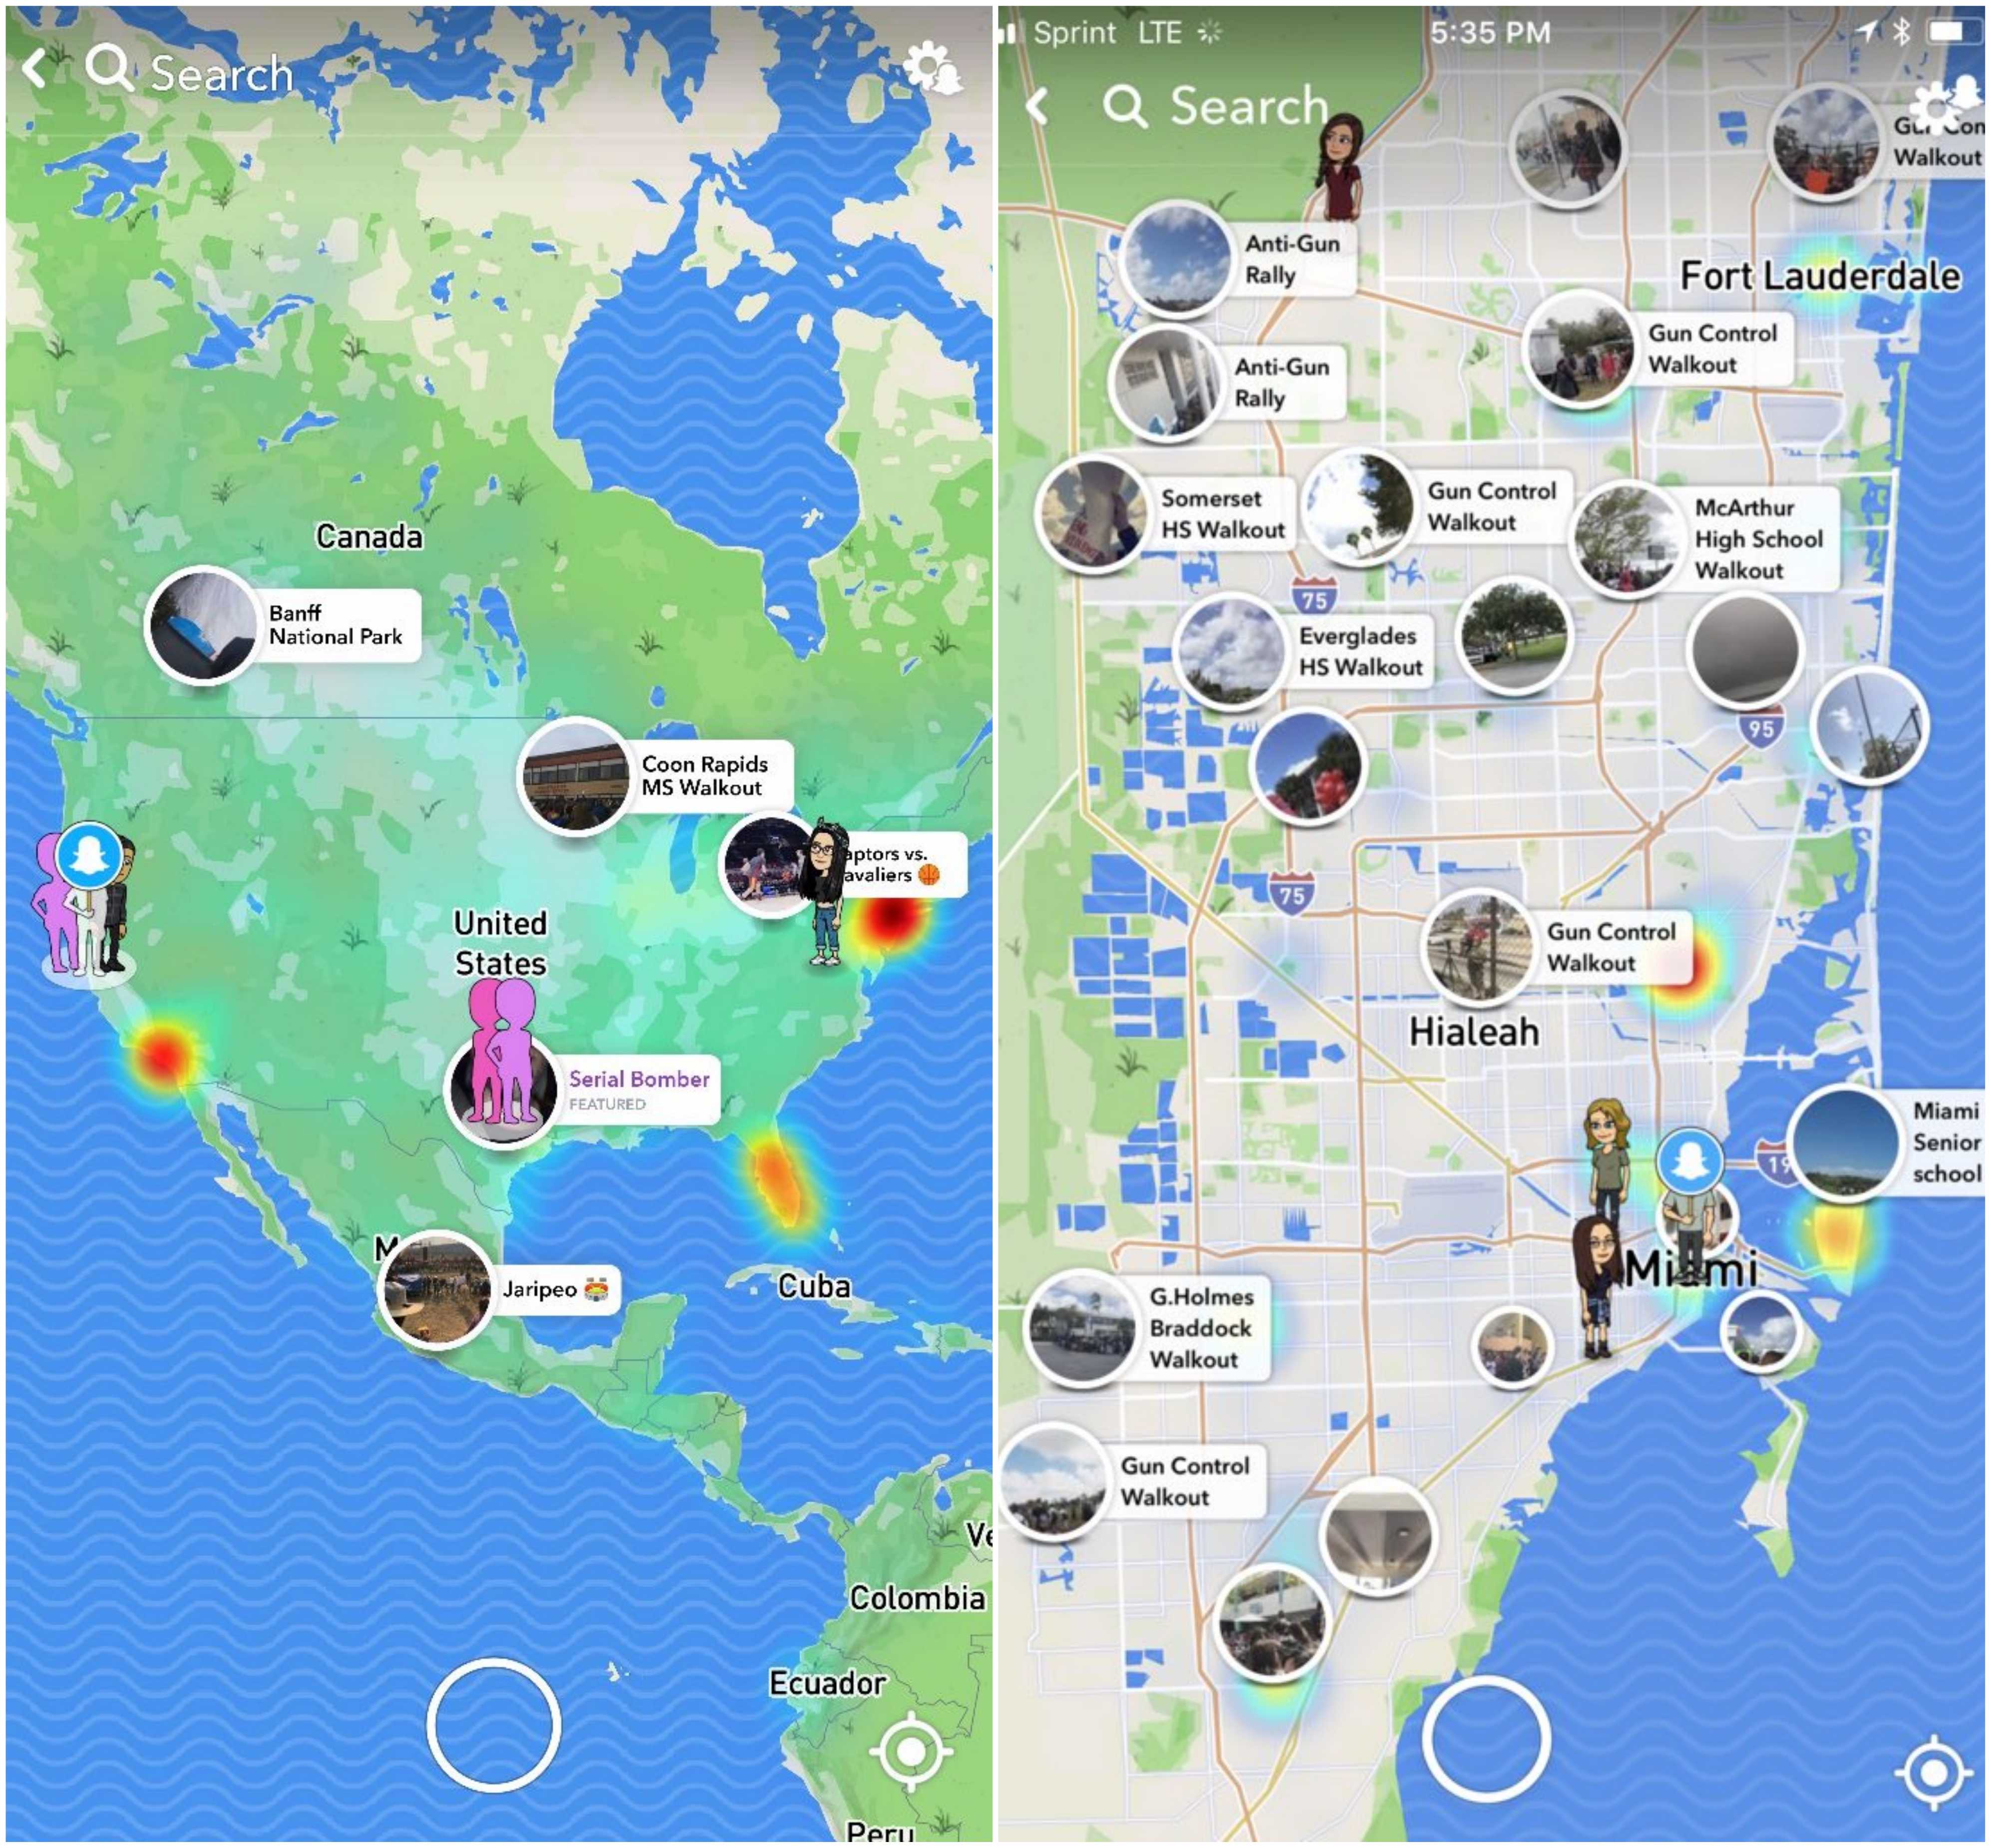 app engagement snapchat events